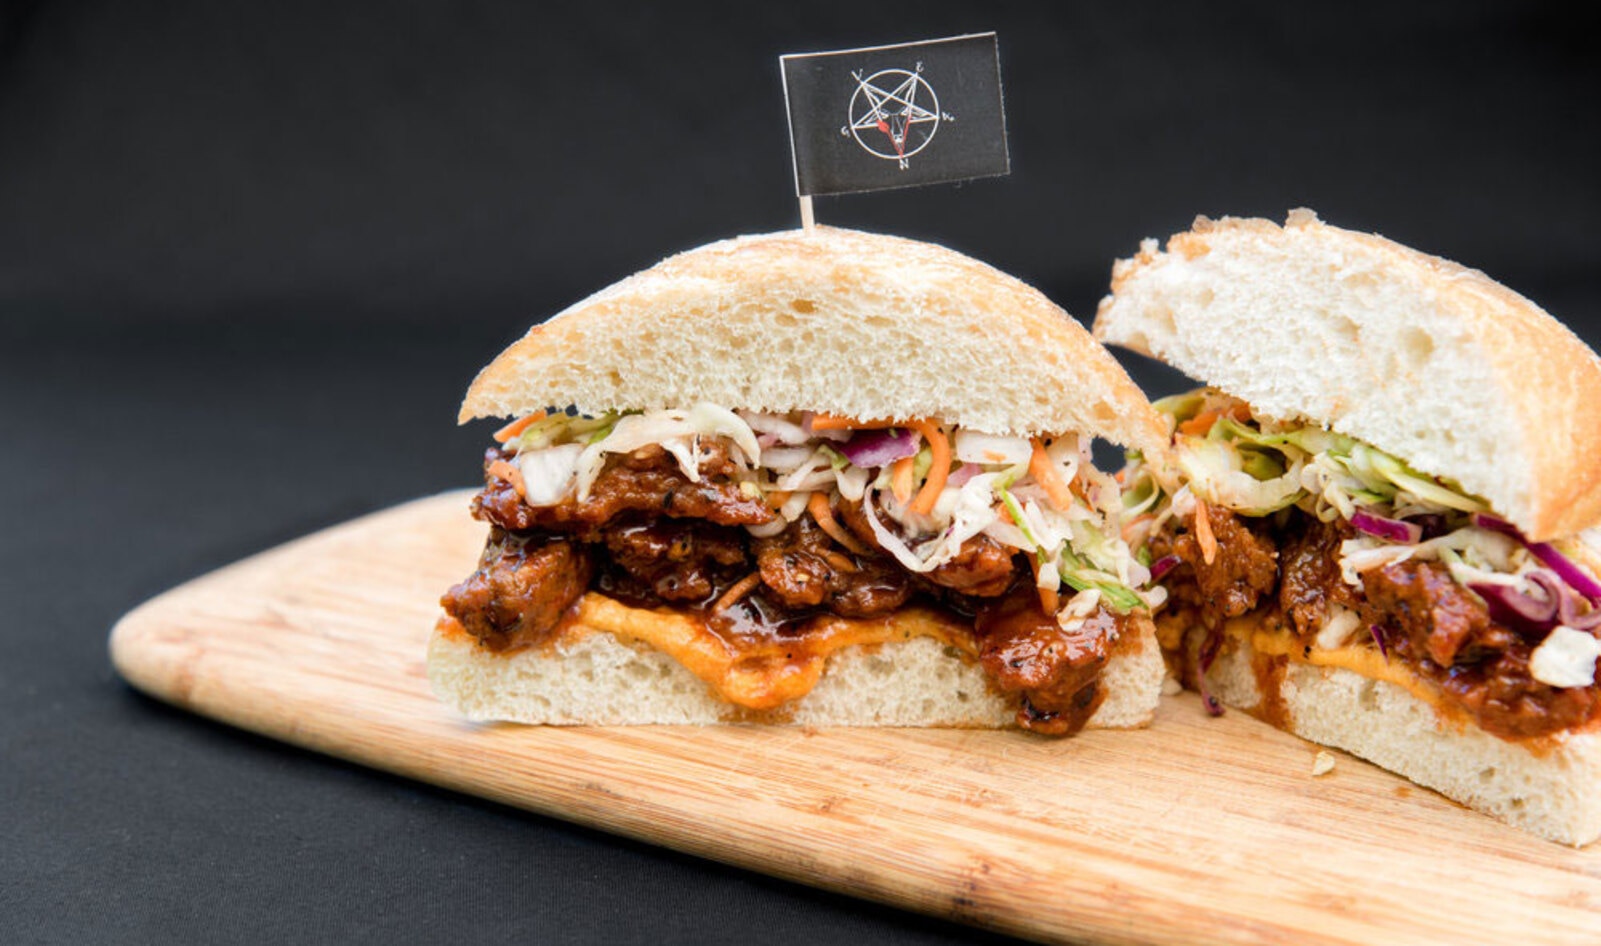 Vegan Grocery Store Partners With Portland Sandwich Shop to Launch New Vegan Meat Line